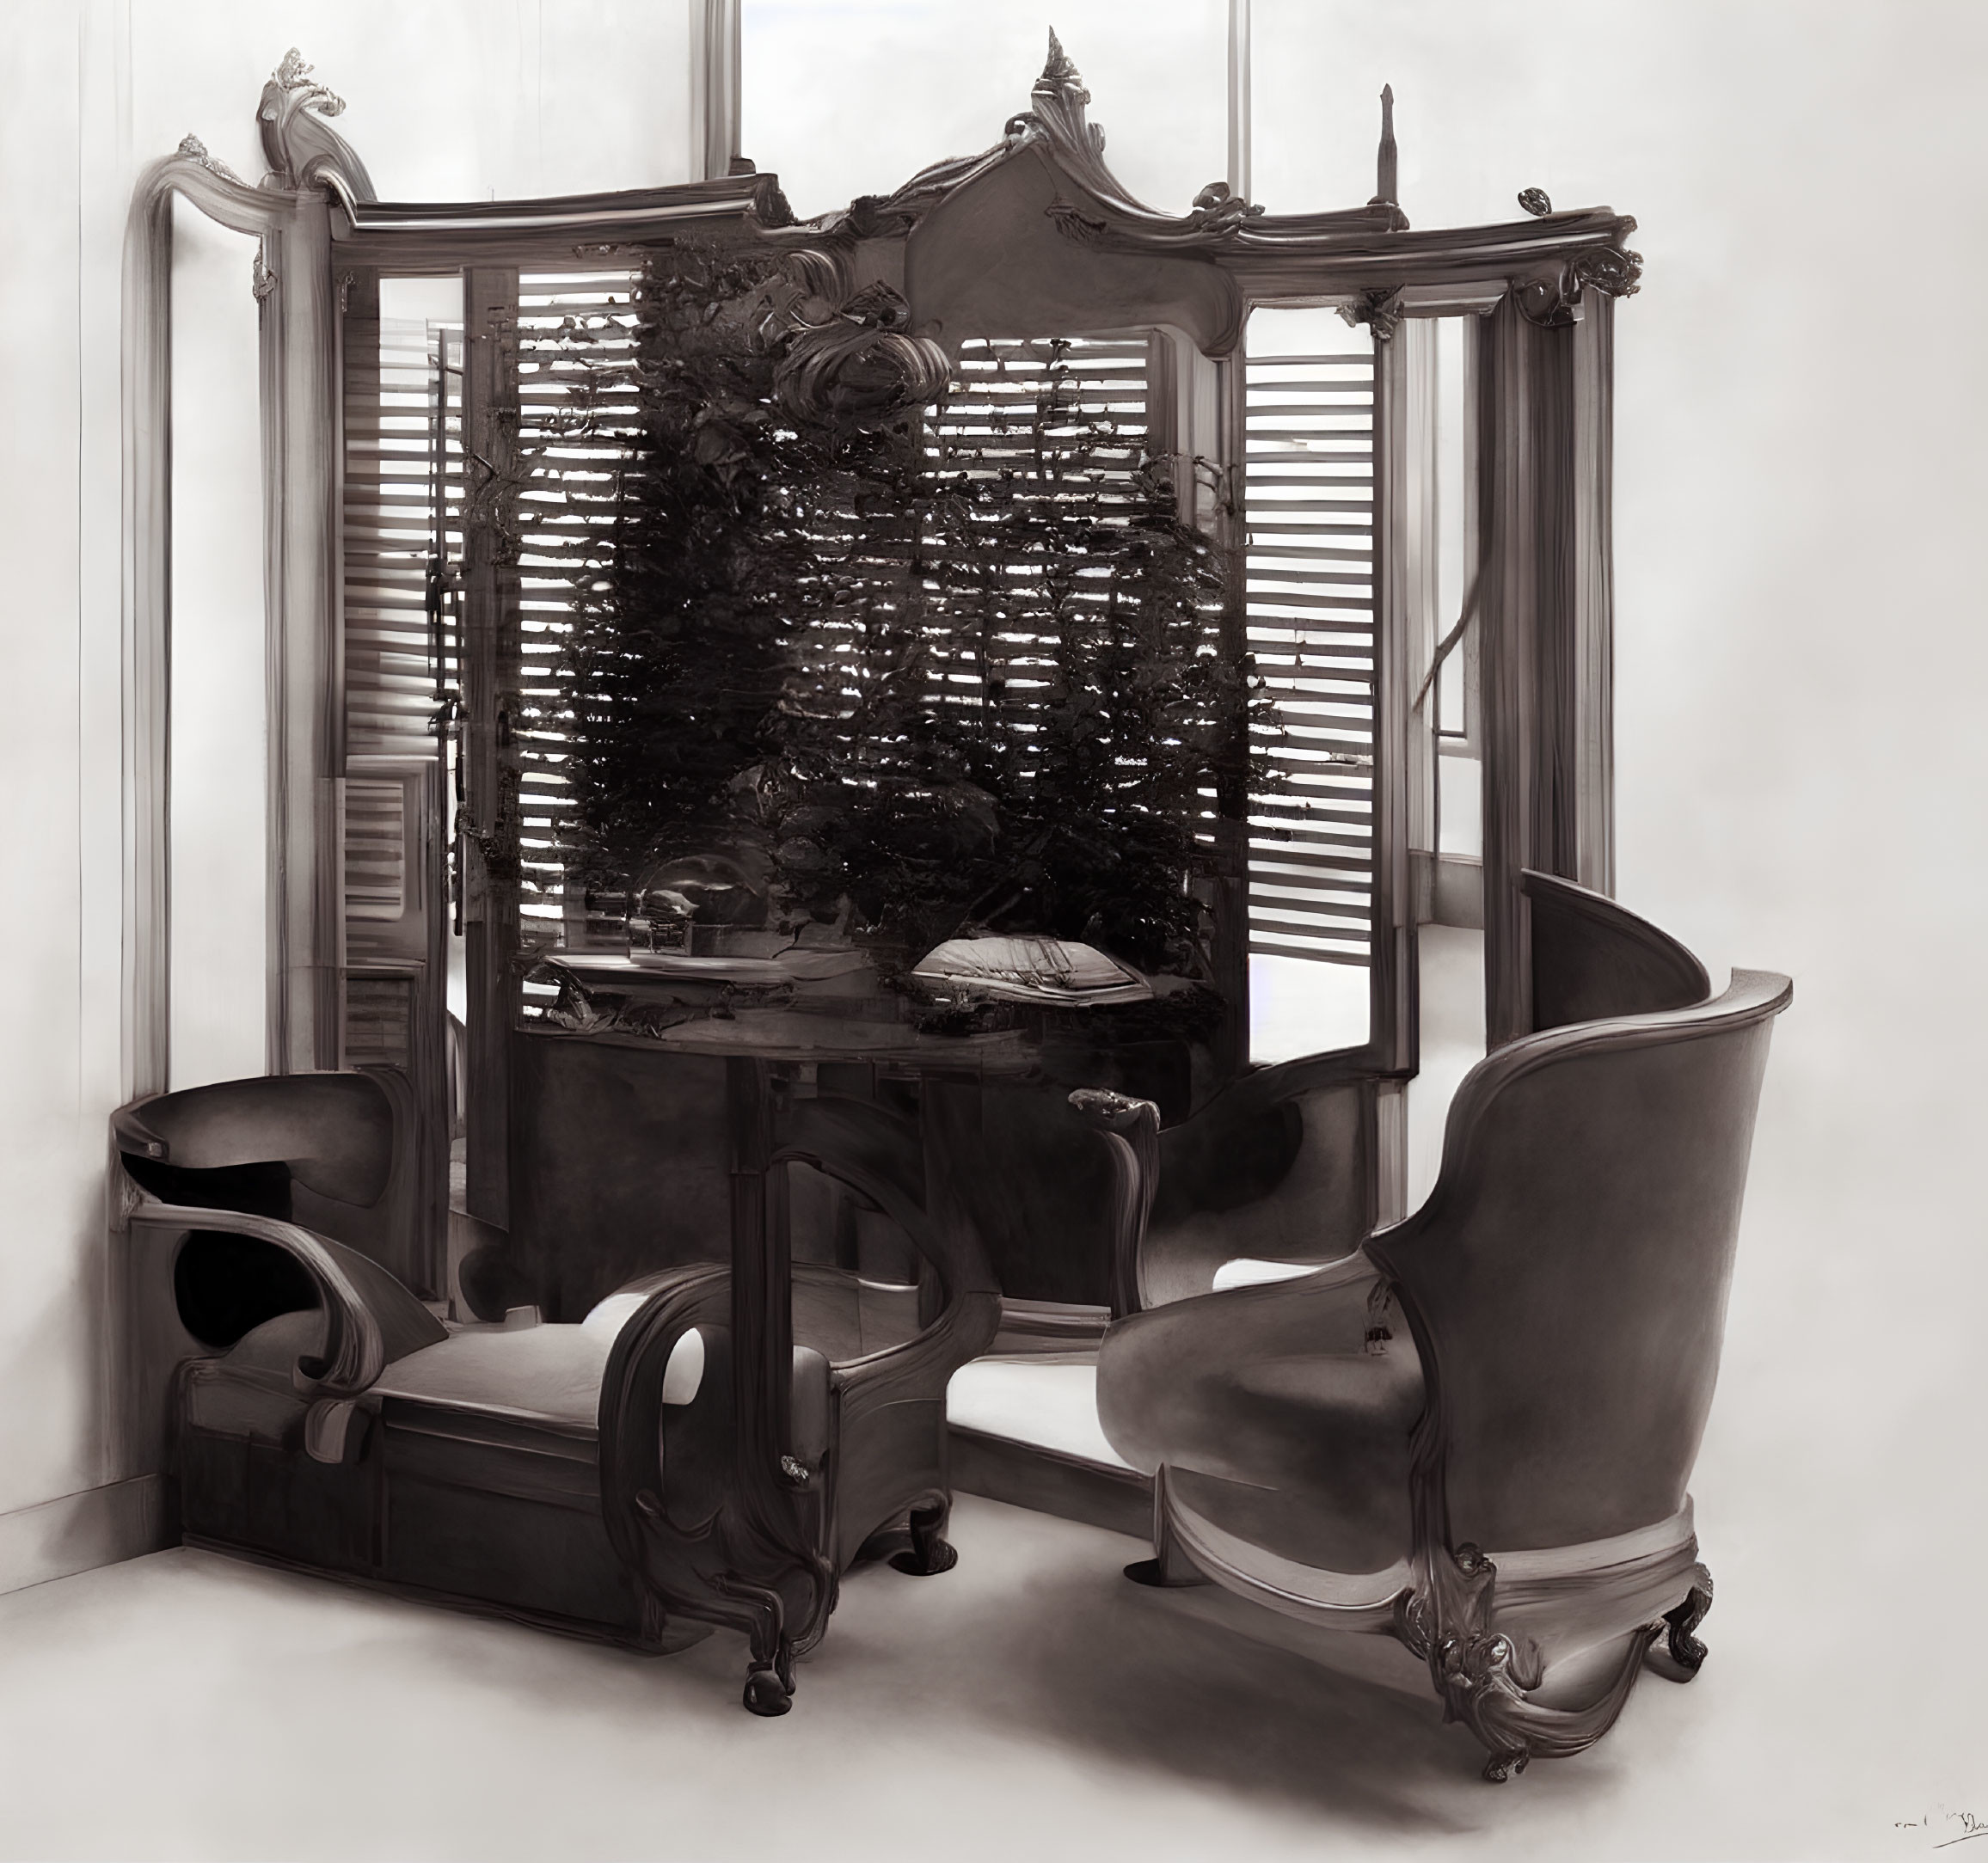 Monochrome vintage interior with ornate furniture and reflective sculpture.